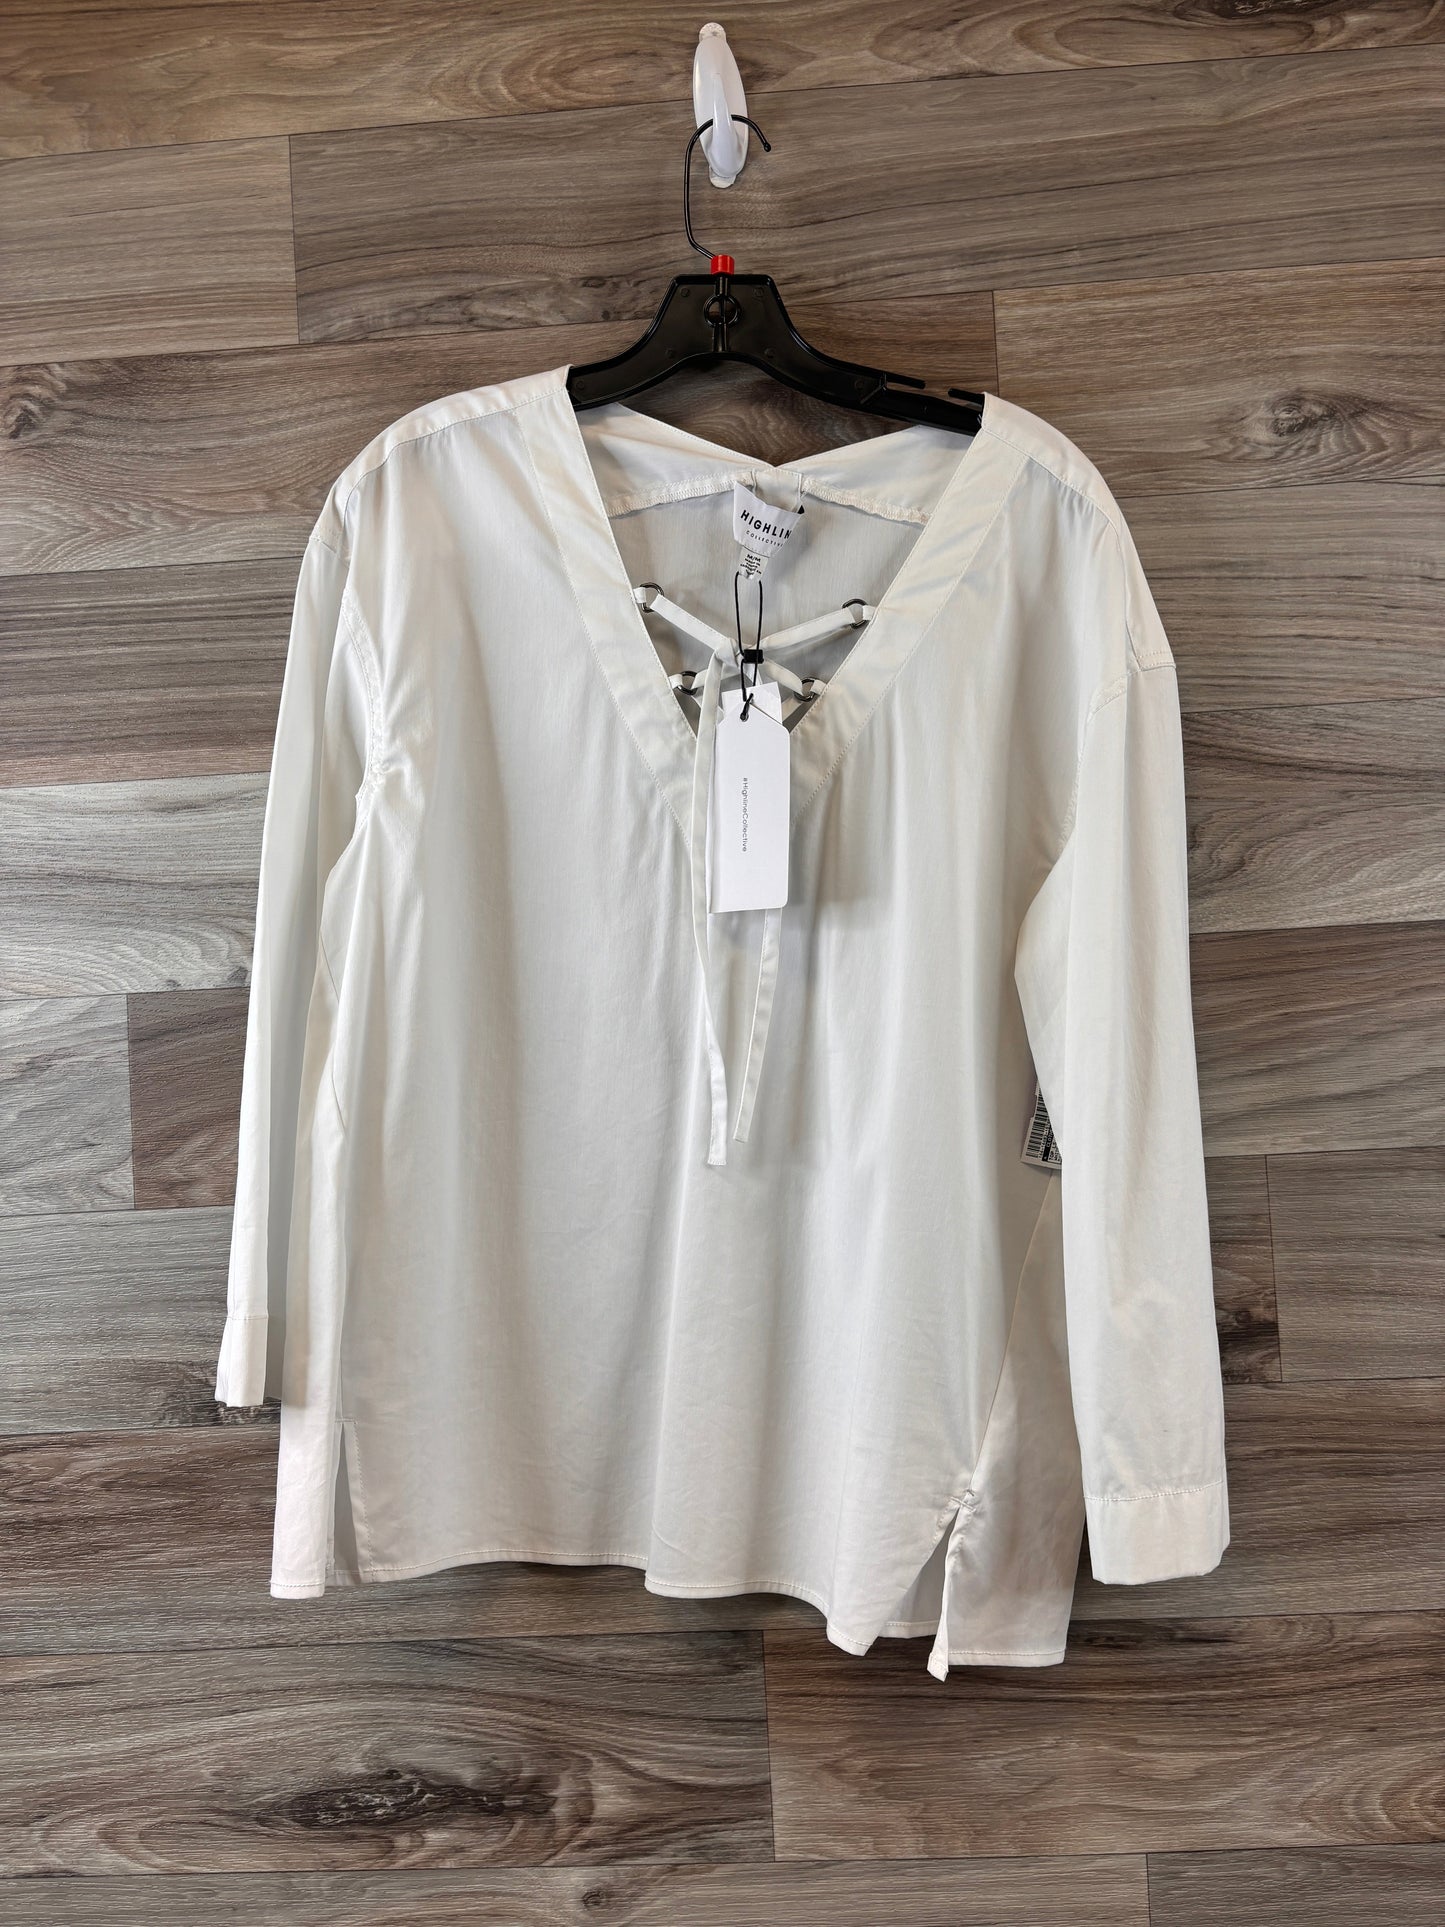 White Top Long Sleeve Clothes Mentor, Size M